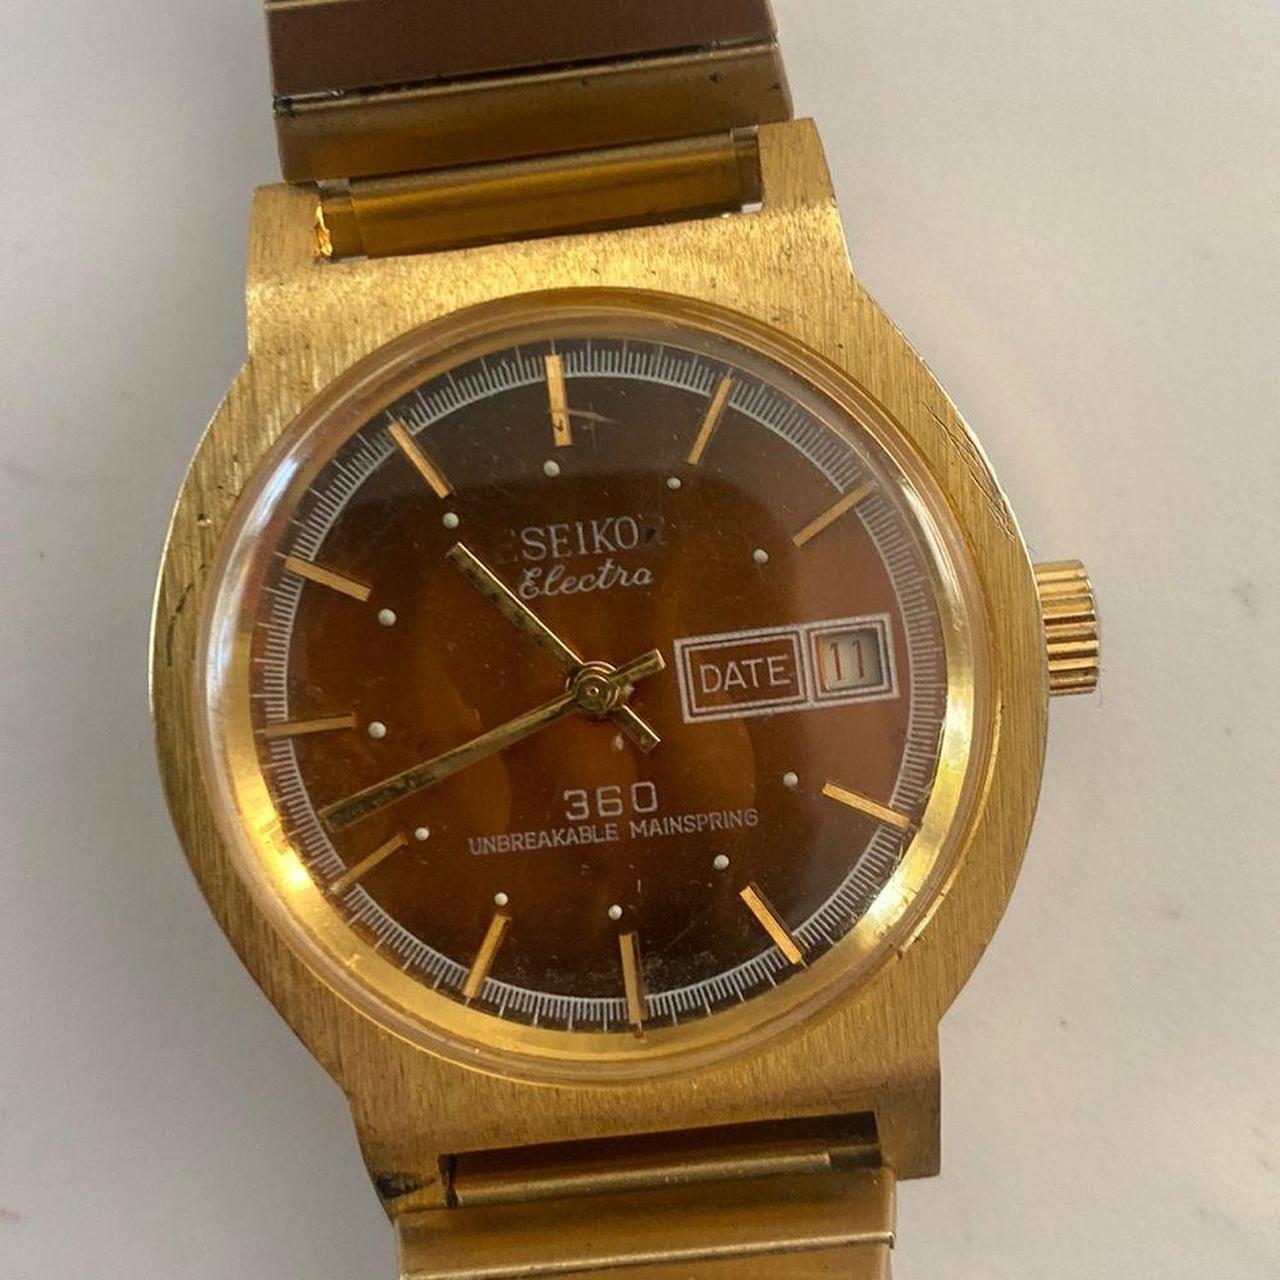 Product Image 1 - Watch is well loved but